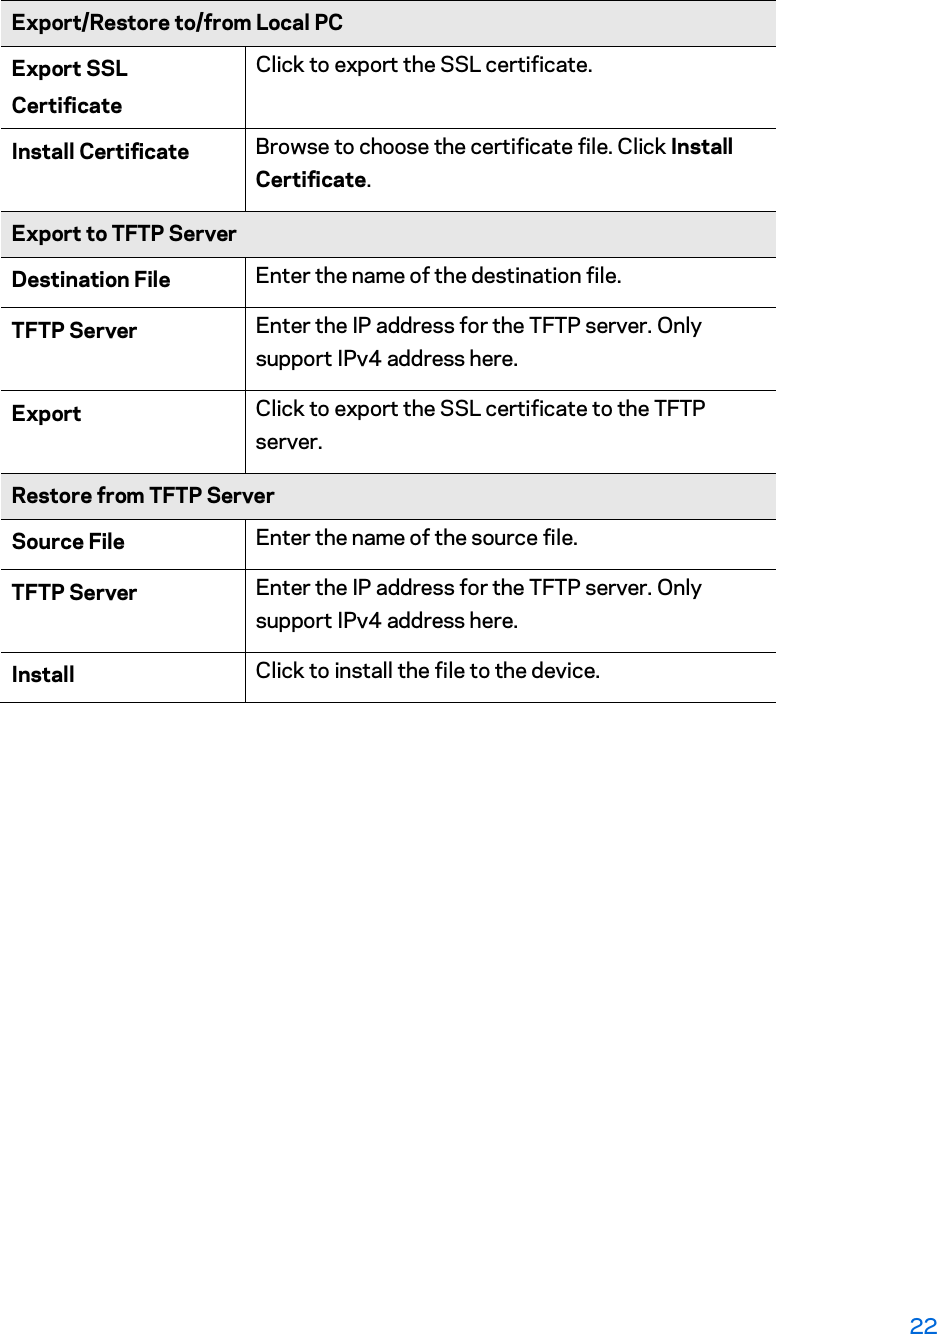 Export/Restore to/from Local PC Export SSL  Certificate Click to export the SSL certificate. Install Certificate  Browse to choose the certificate file. Click Install Certificate. Export to TFTP Server Destination File  Enter the name of the destination file. TFTP Server  Enter the IP address for the TFTP server. Only support IPv4 address here. Export   Click to export the SSL certificate to the TFTP server. Restore from TFTP Server Source File  Enter the name of the source file. TFTP Server  Enter the IP address for the TFTP server. Only support IPv4 address here. Install  Click to install the file to the device. 22 